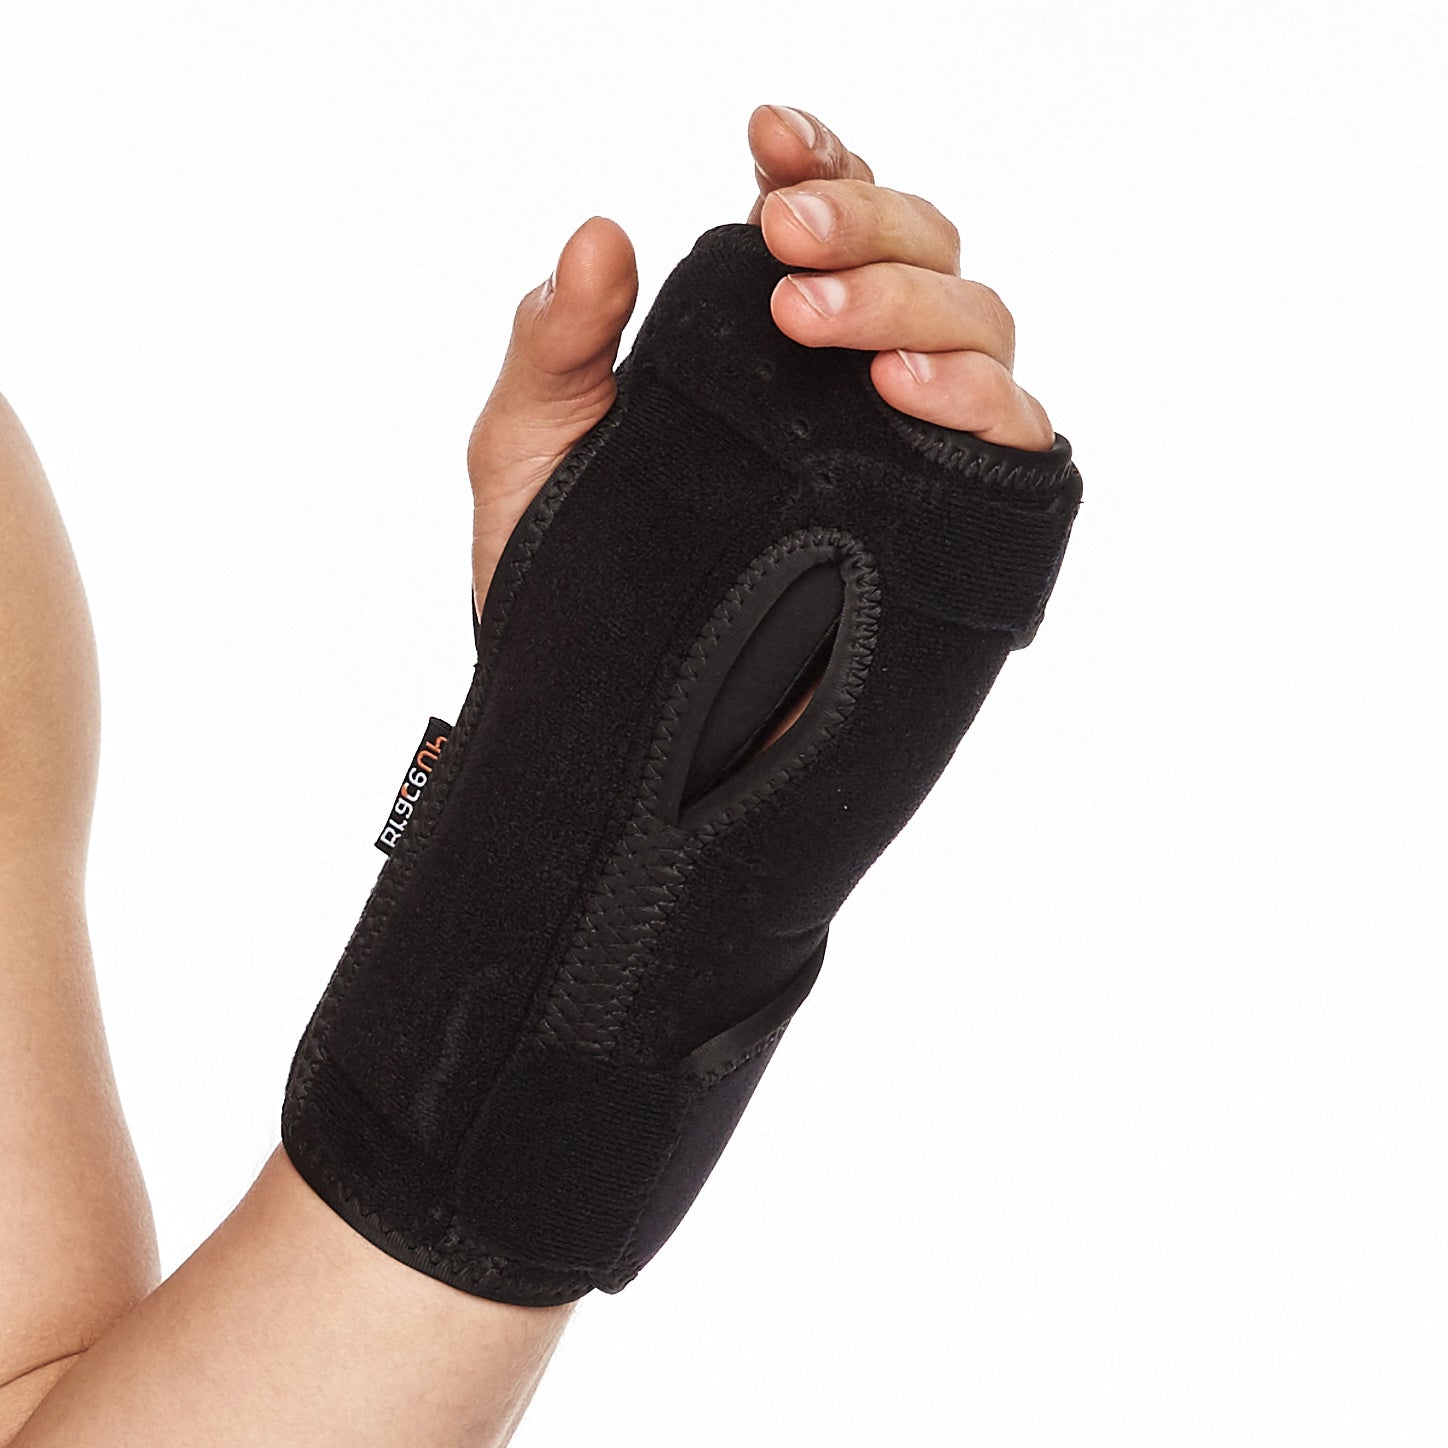 Yirtree Night Wrist Sleep Support Brace - Fits Both Hands - Cushioned to  Help With Carpal Tunnel and Relieve and Treat Wrist Pain ,Sprain Forearm  Splint Band Strap Safe Protector 